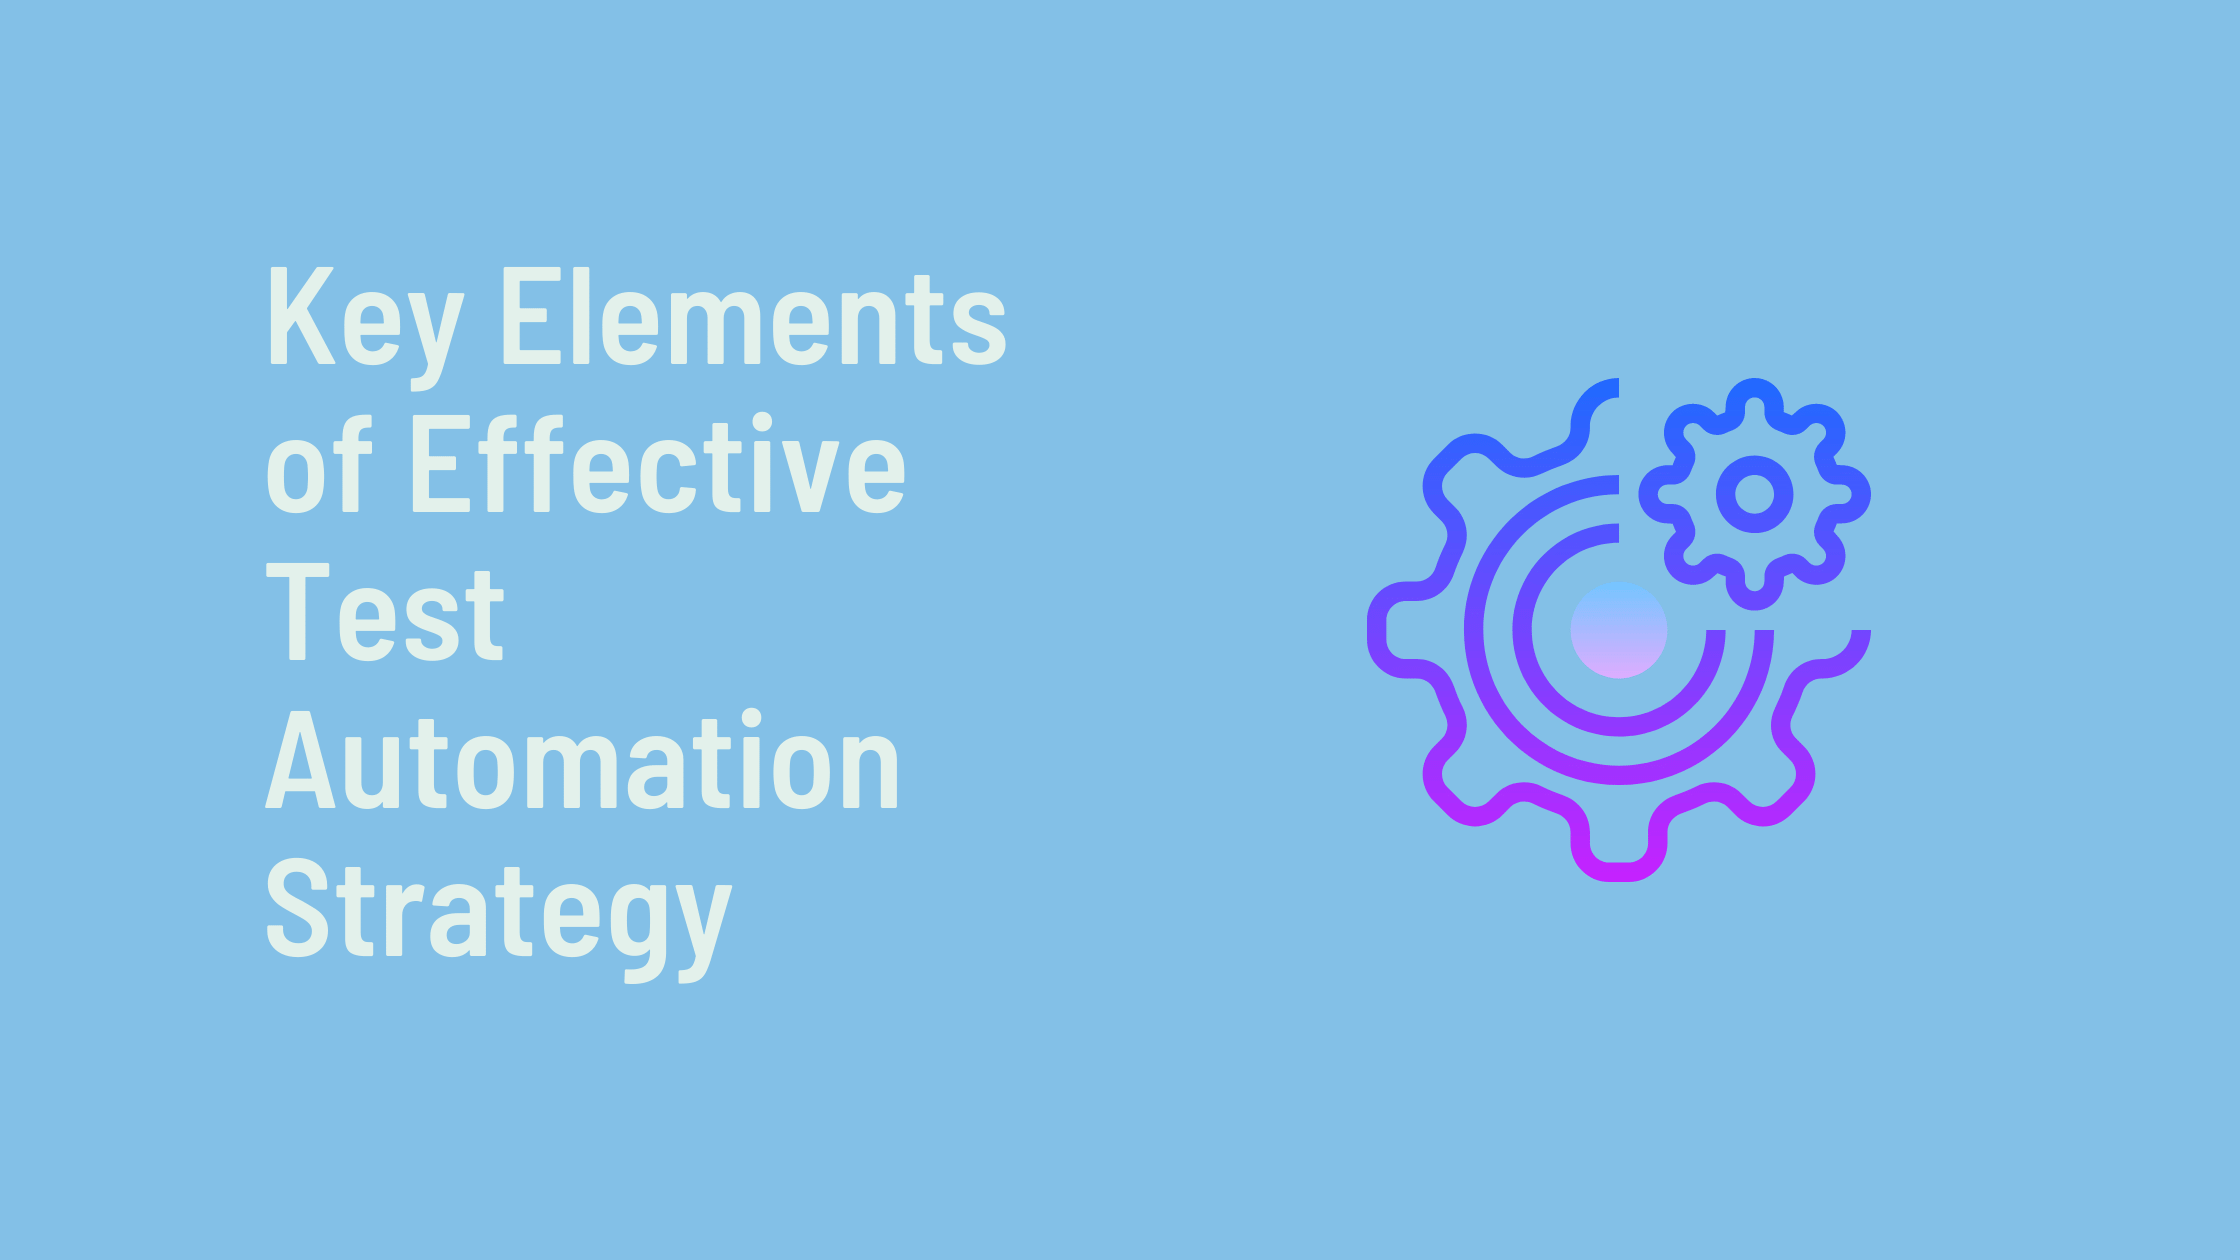 Key Elements of Effective Test Automation Strategy